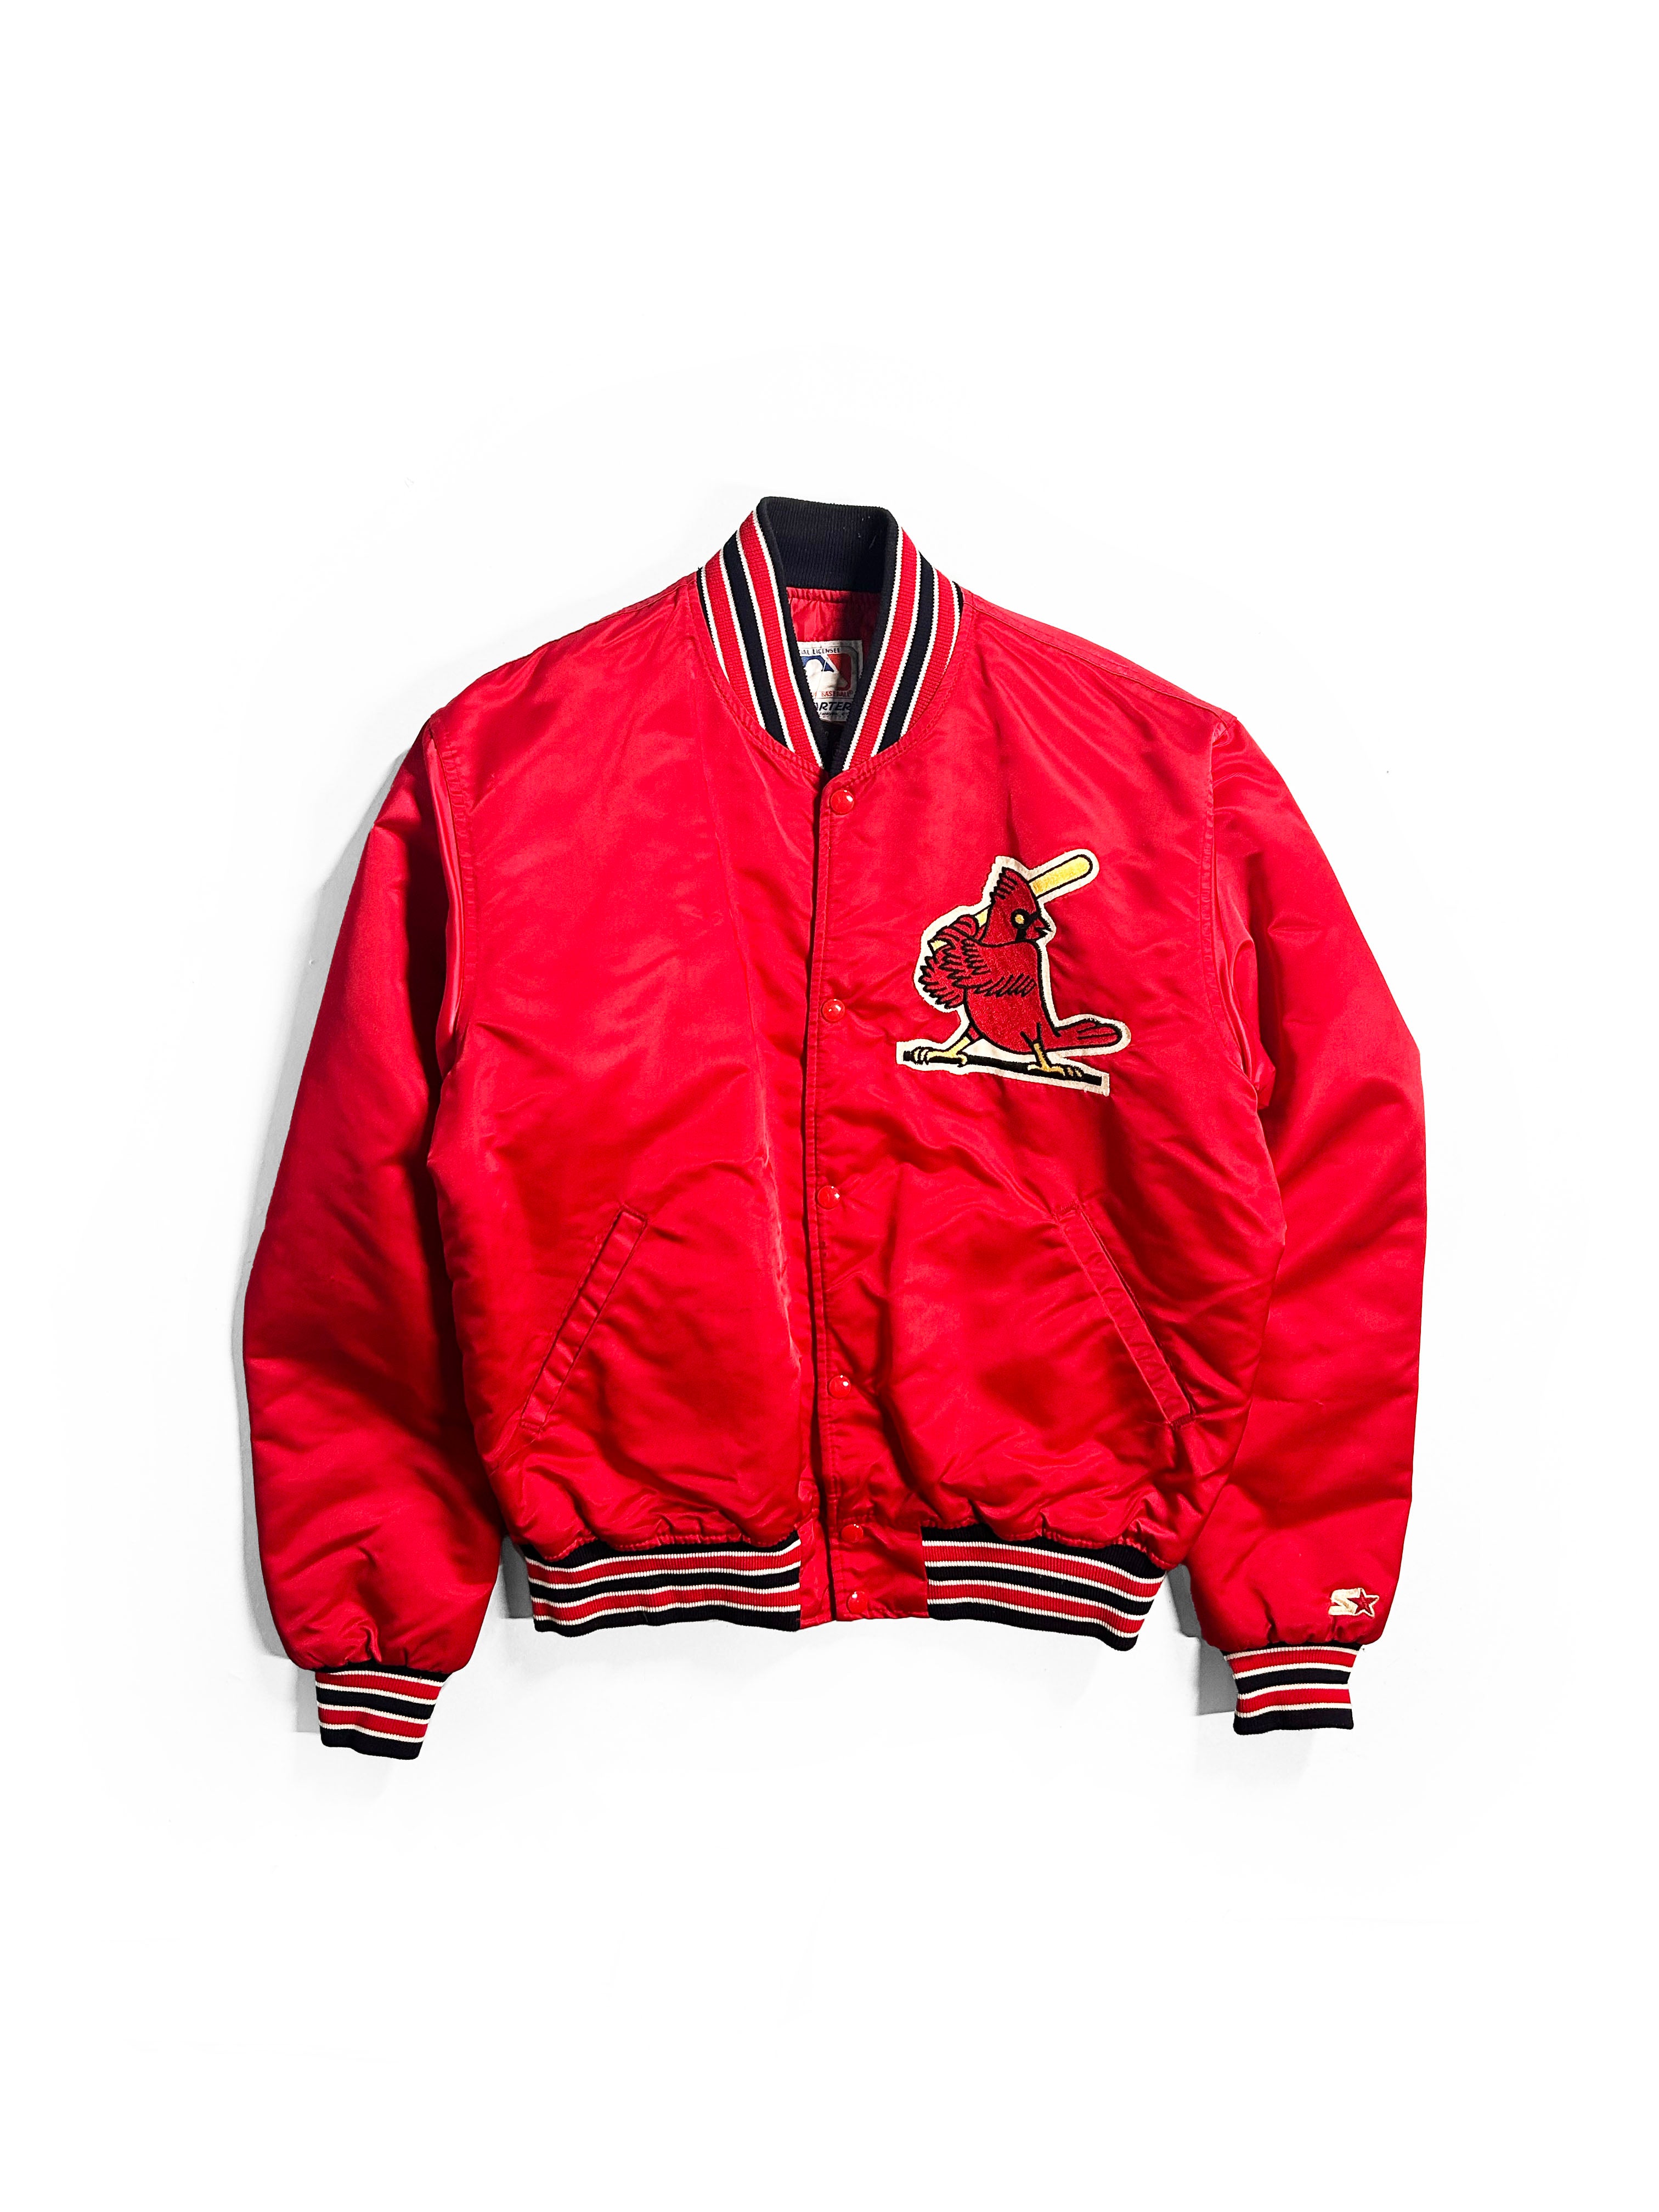 Satin Starter St. Louis Cardinals White and Red Jacket